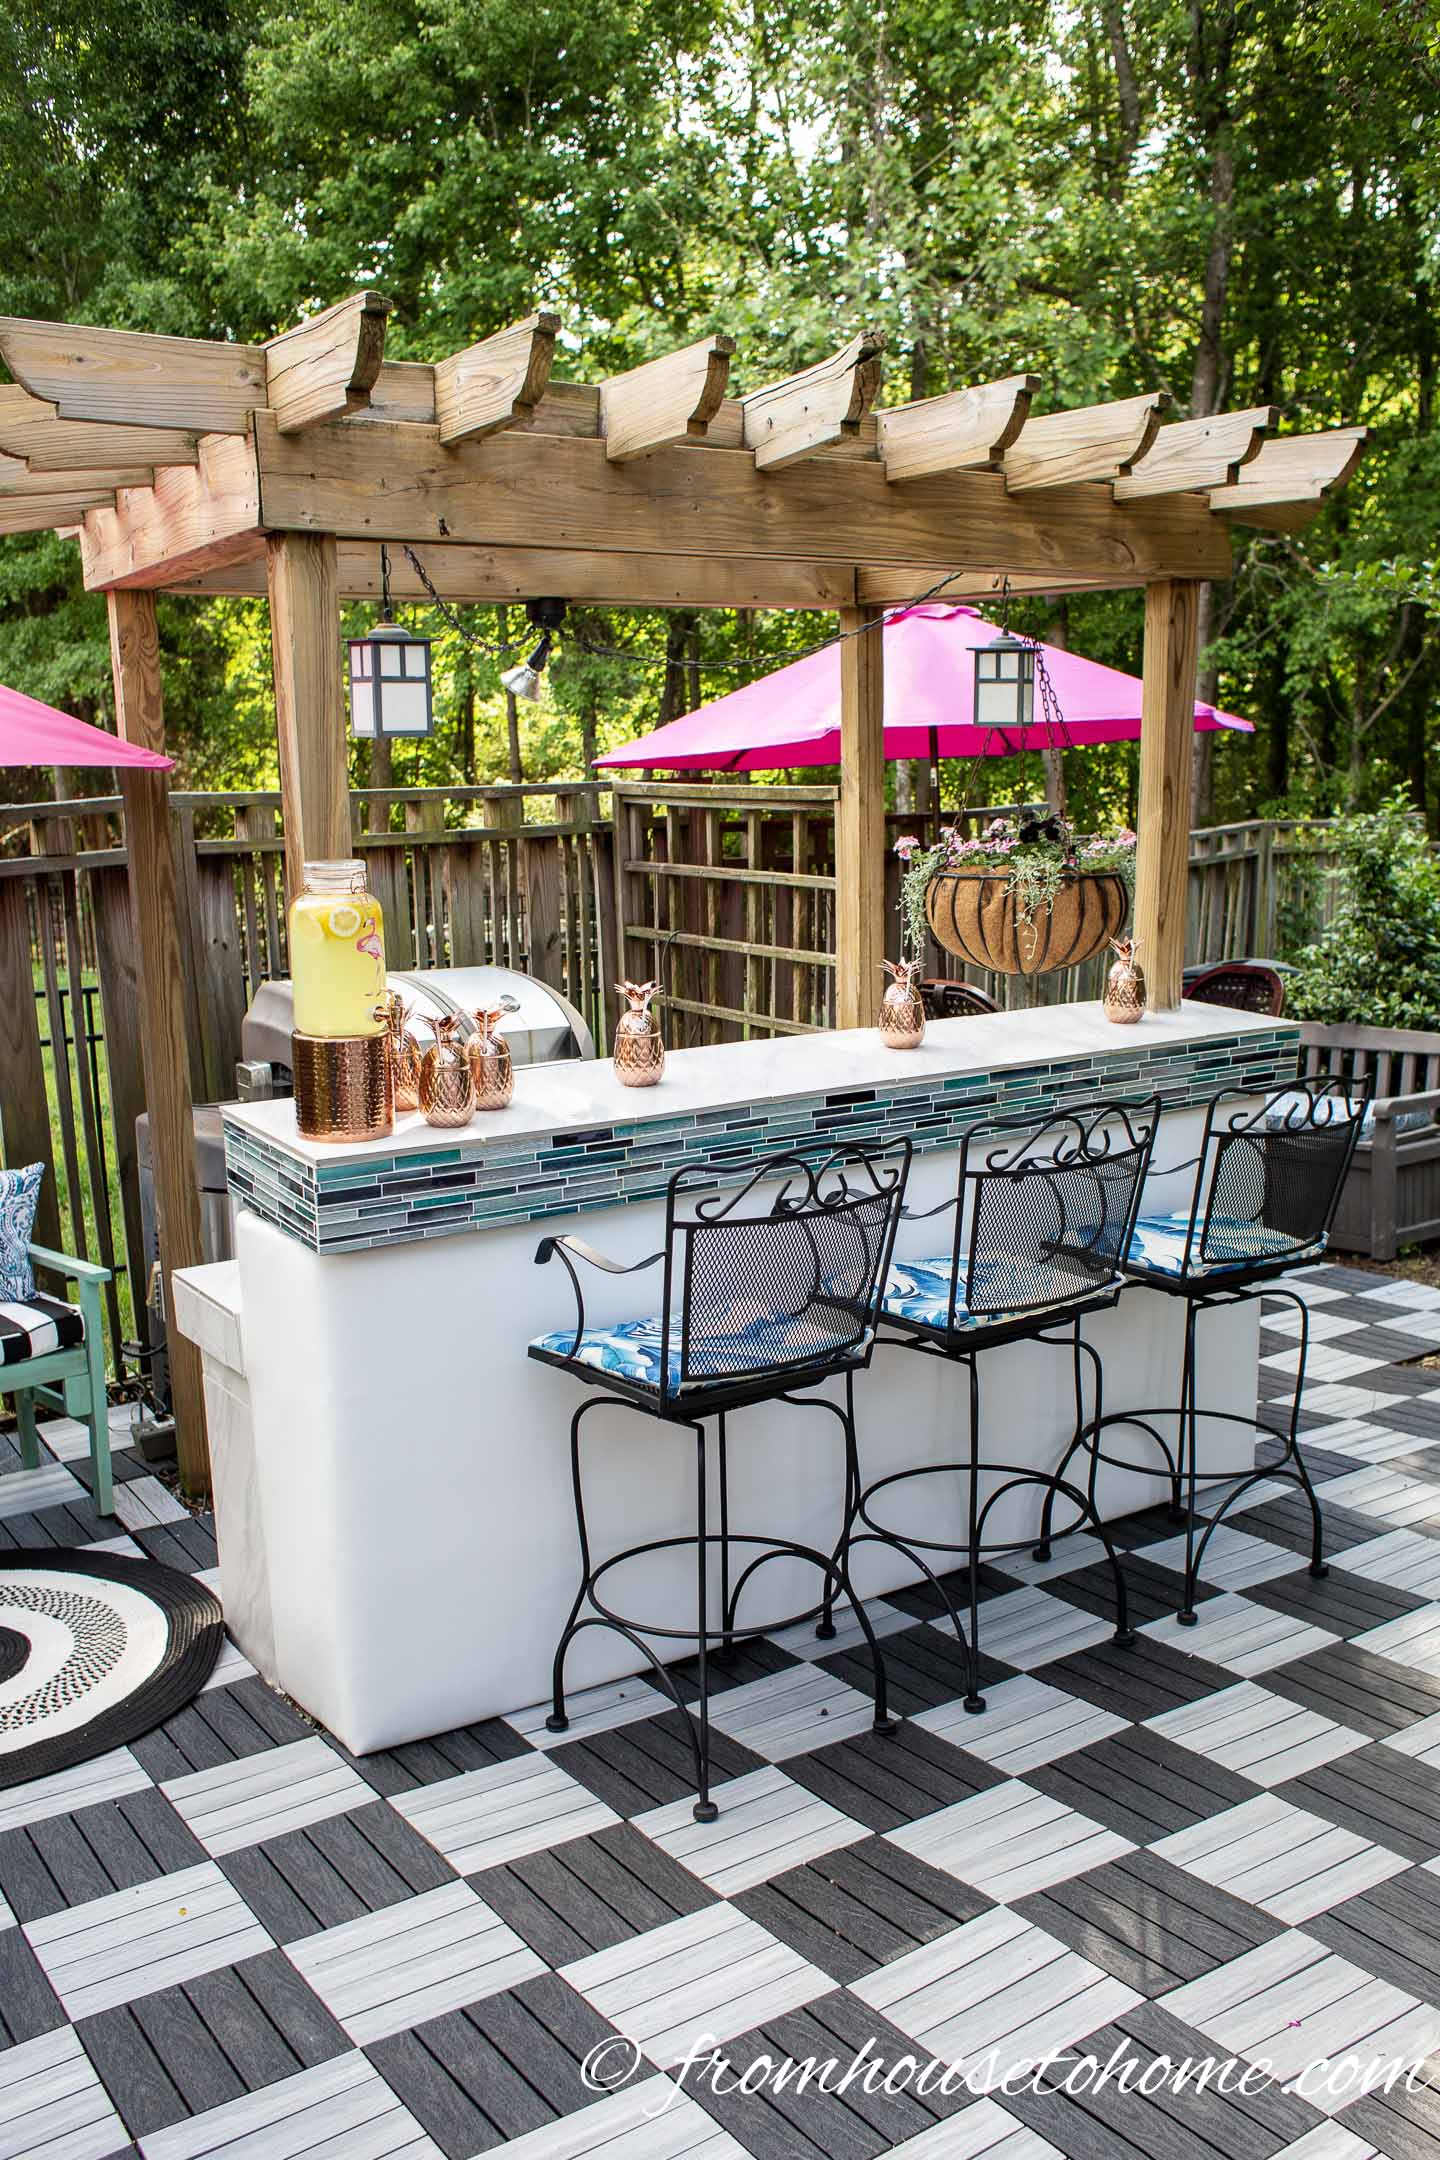 Pergola over an outdoor bar and grill area with 3 barstools and a black and white checkered patio